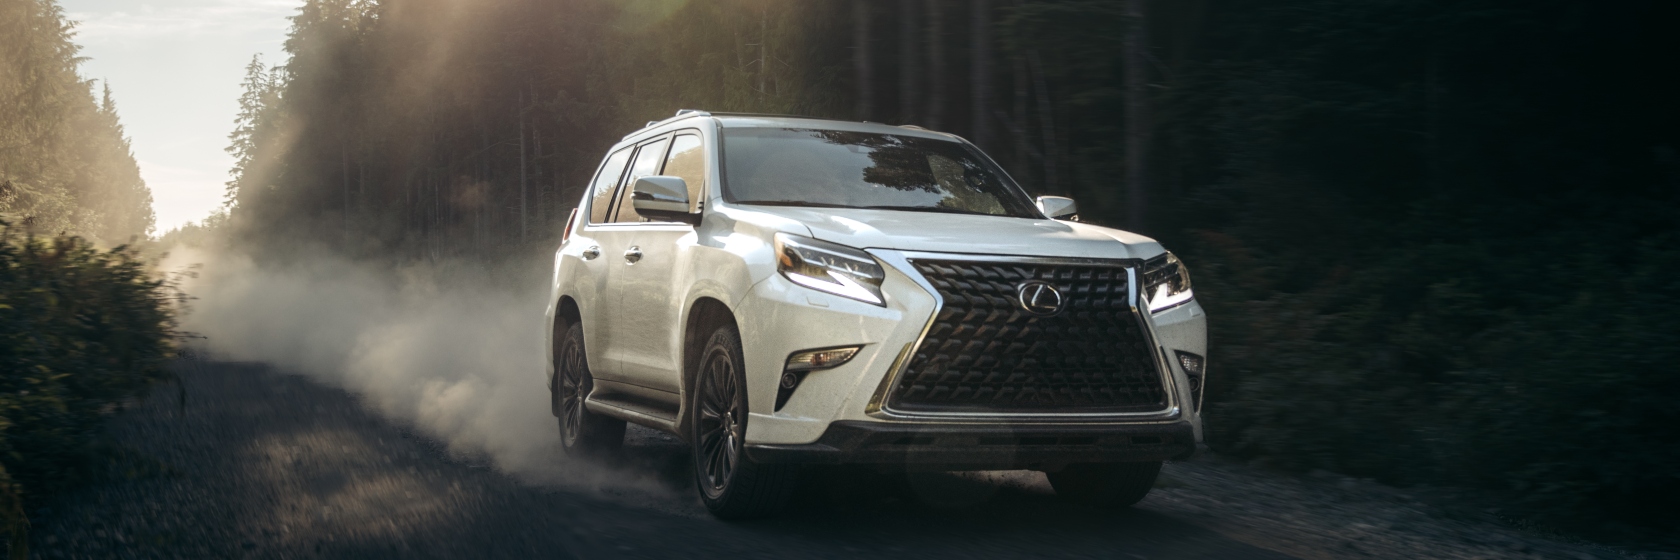 lexus-gx-the-perfect-suv-for-off-road-adventures